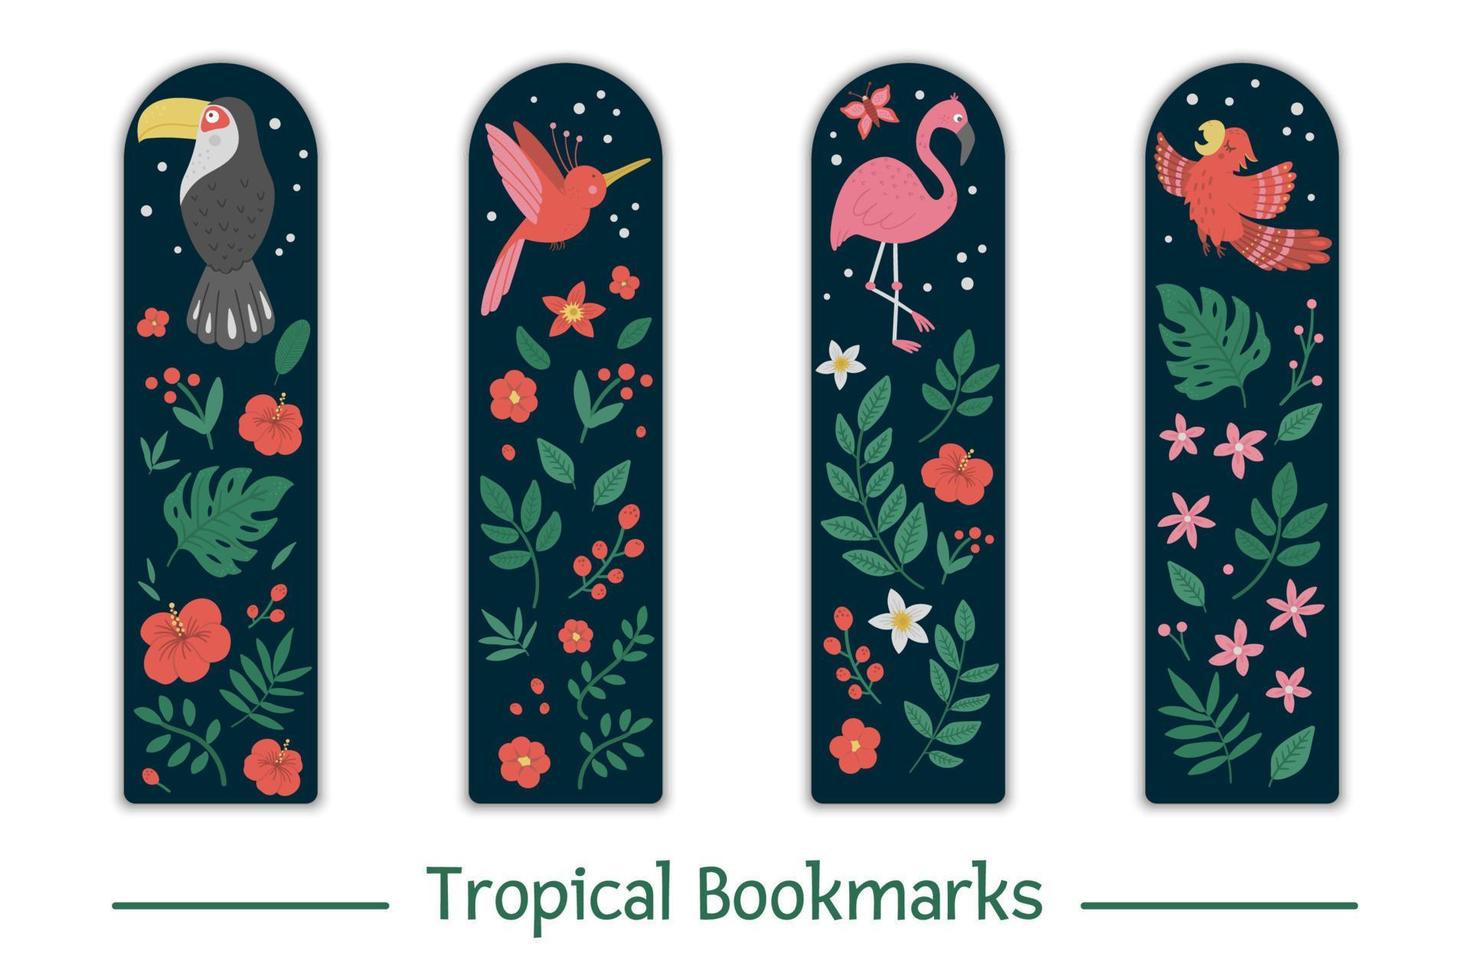 Vector set of bookmarks for children with tropical birds, leaves, flowers. Cute smiling toucan, flamingo, paradise bird, parrot on dark blue background. Vertical layout card templates.